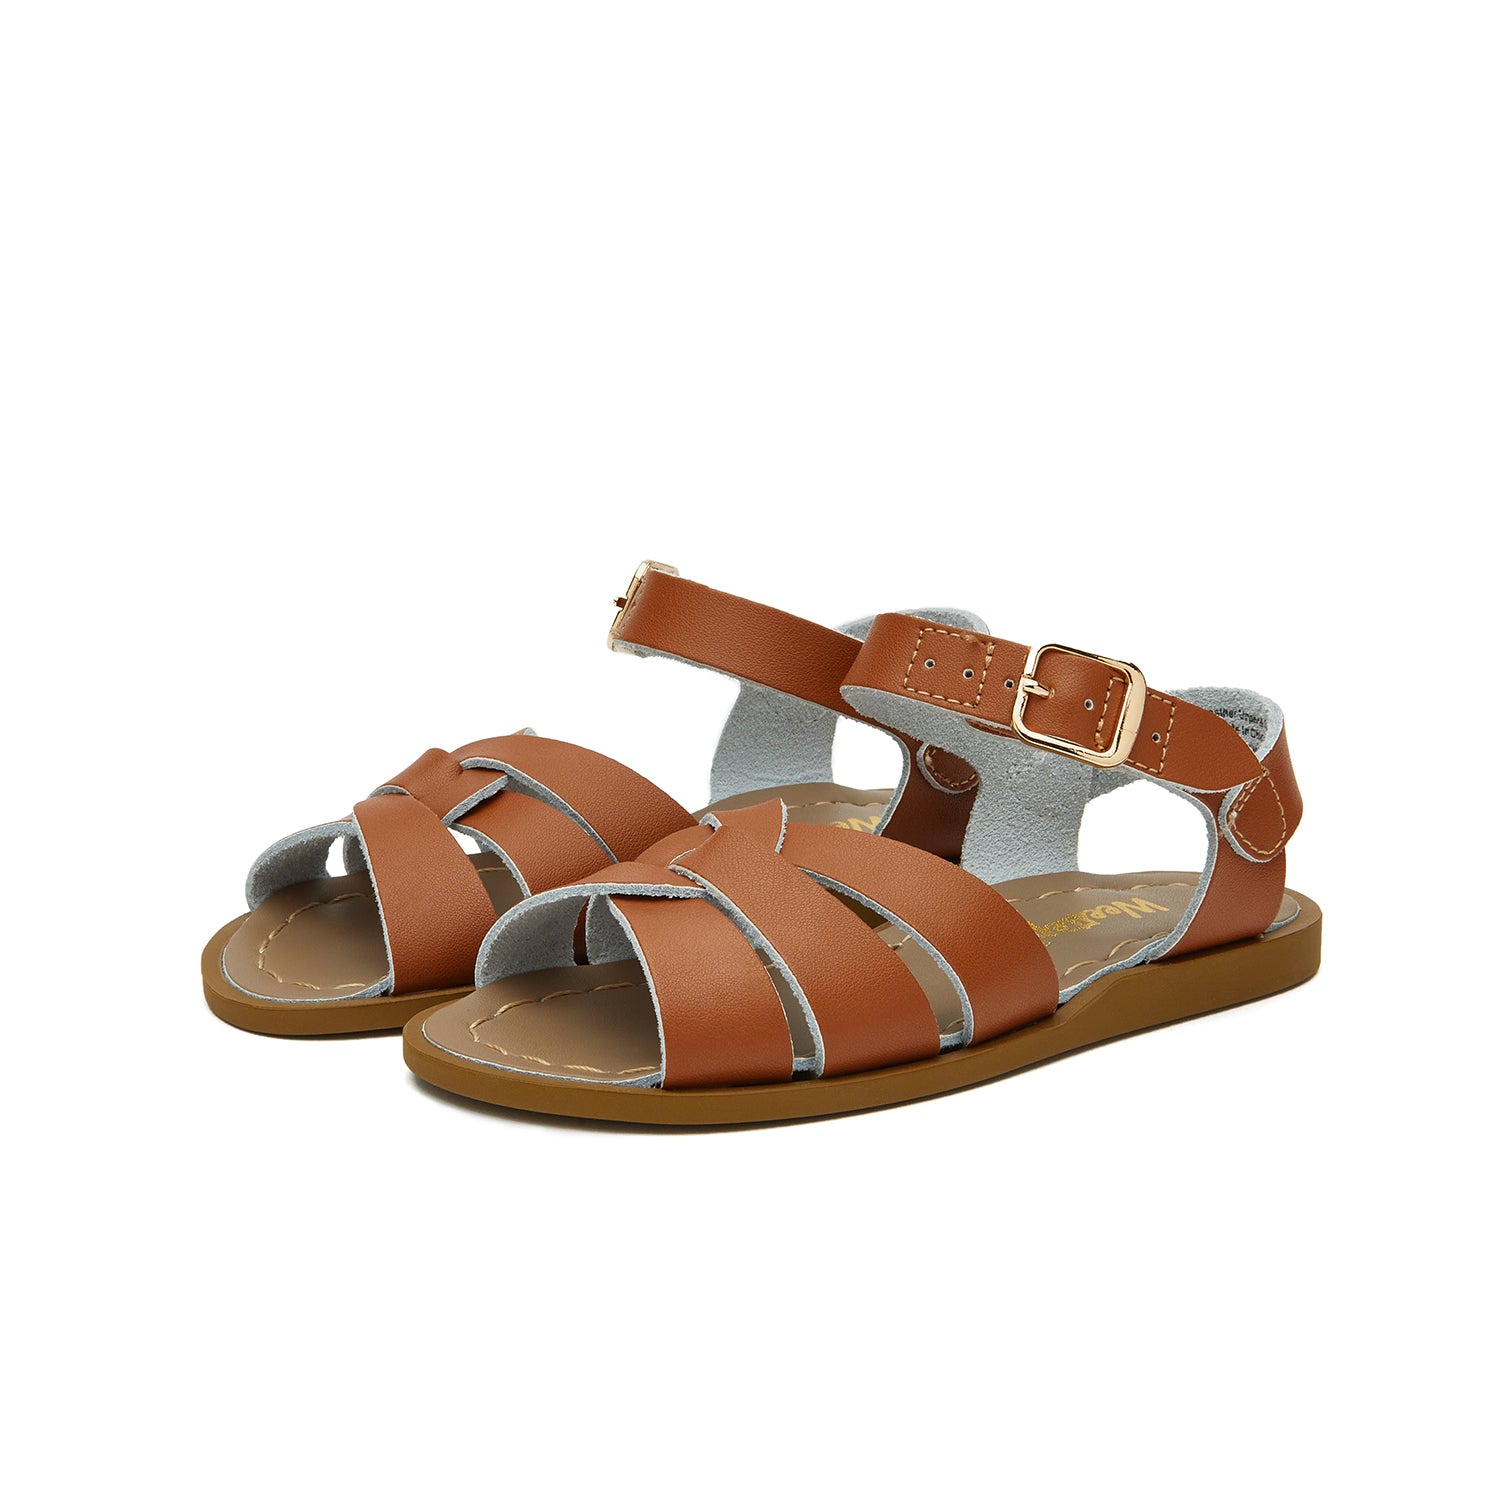 New Toddler Little Kid Classic Leather Sandal - With Elastic